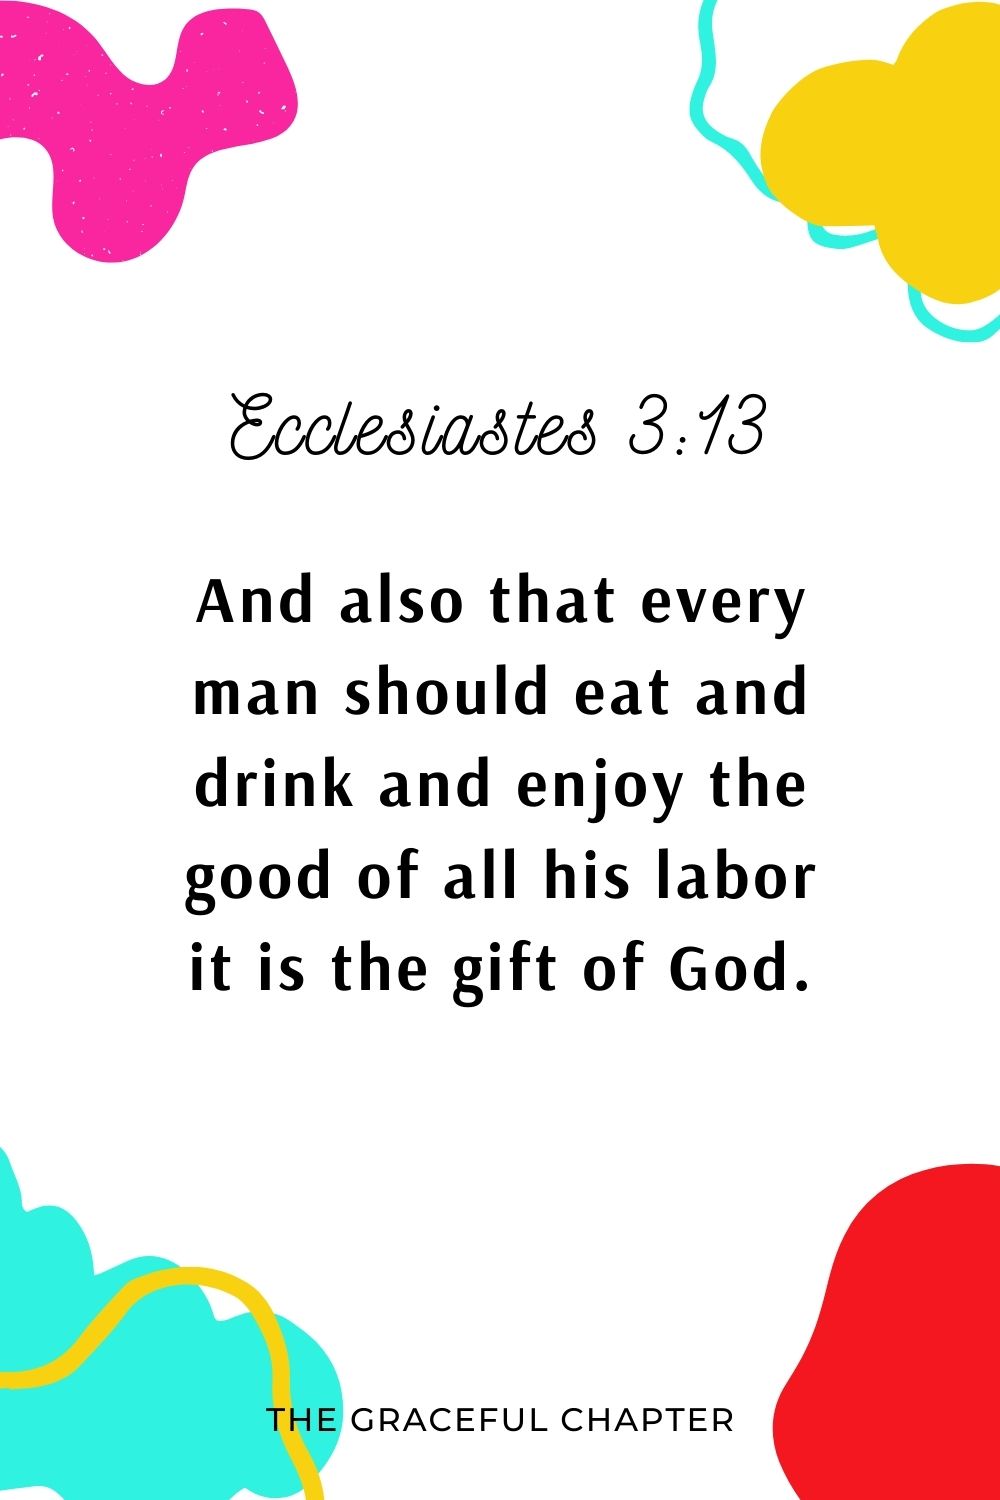 And also that every man should eat and drink and enjoy the good of all his labor it is the gift of God. Ecclesiastes 3:13